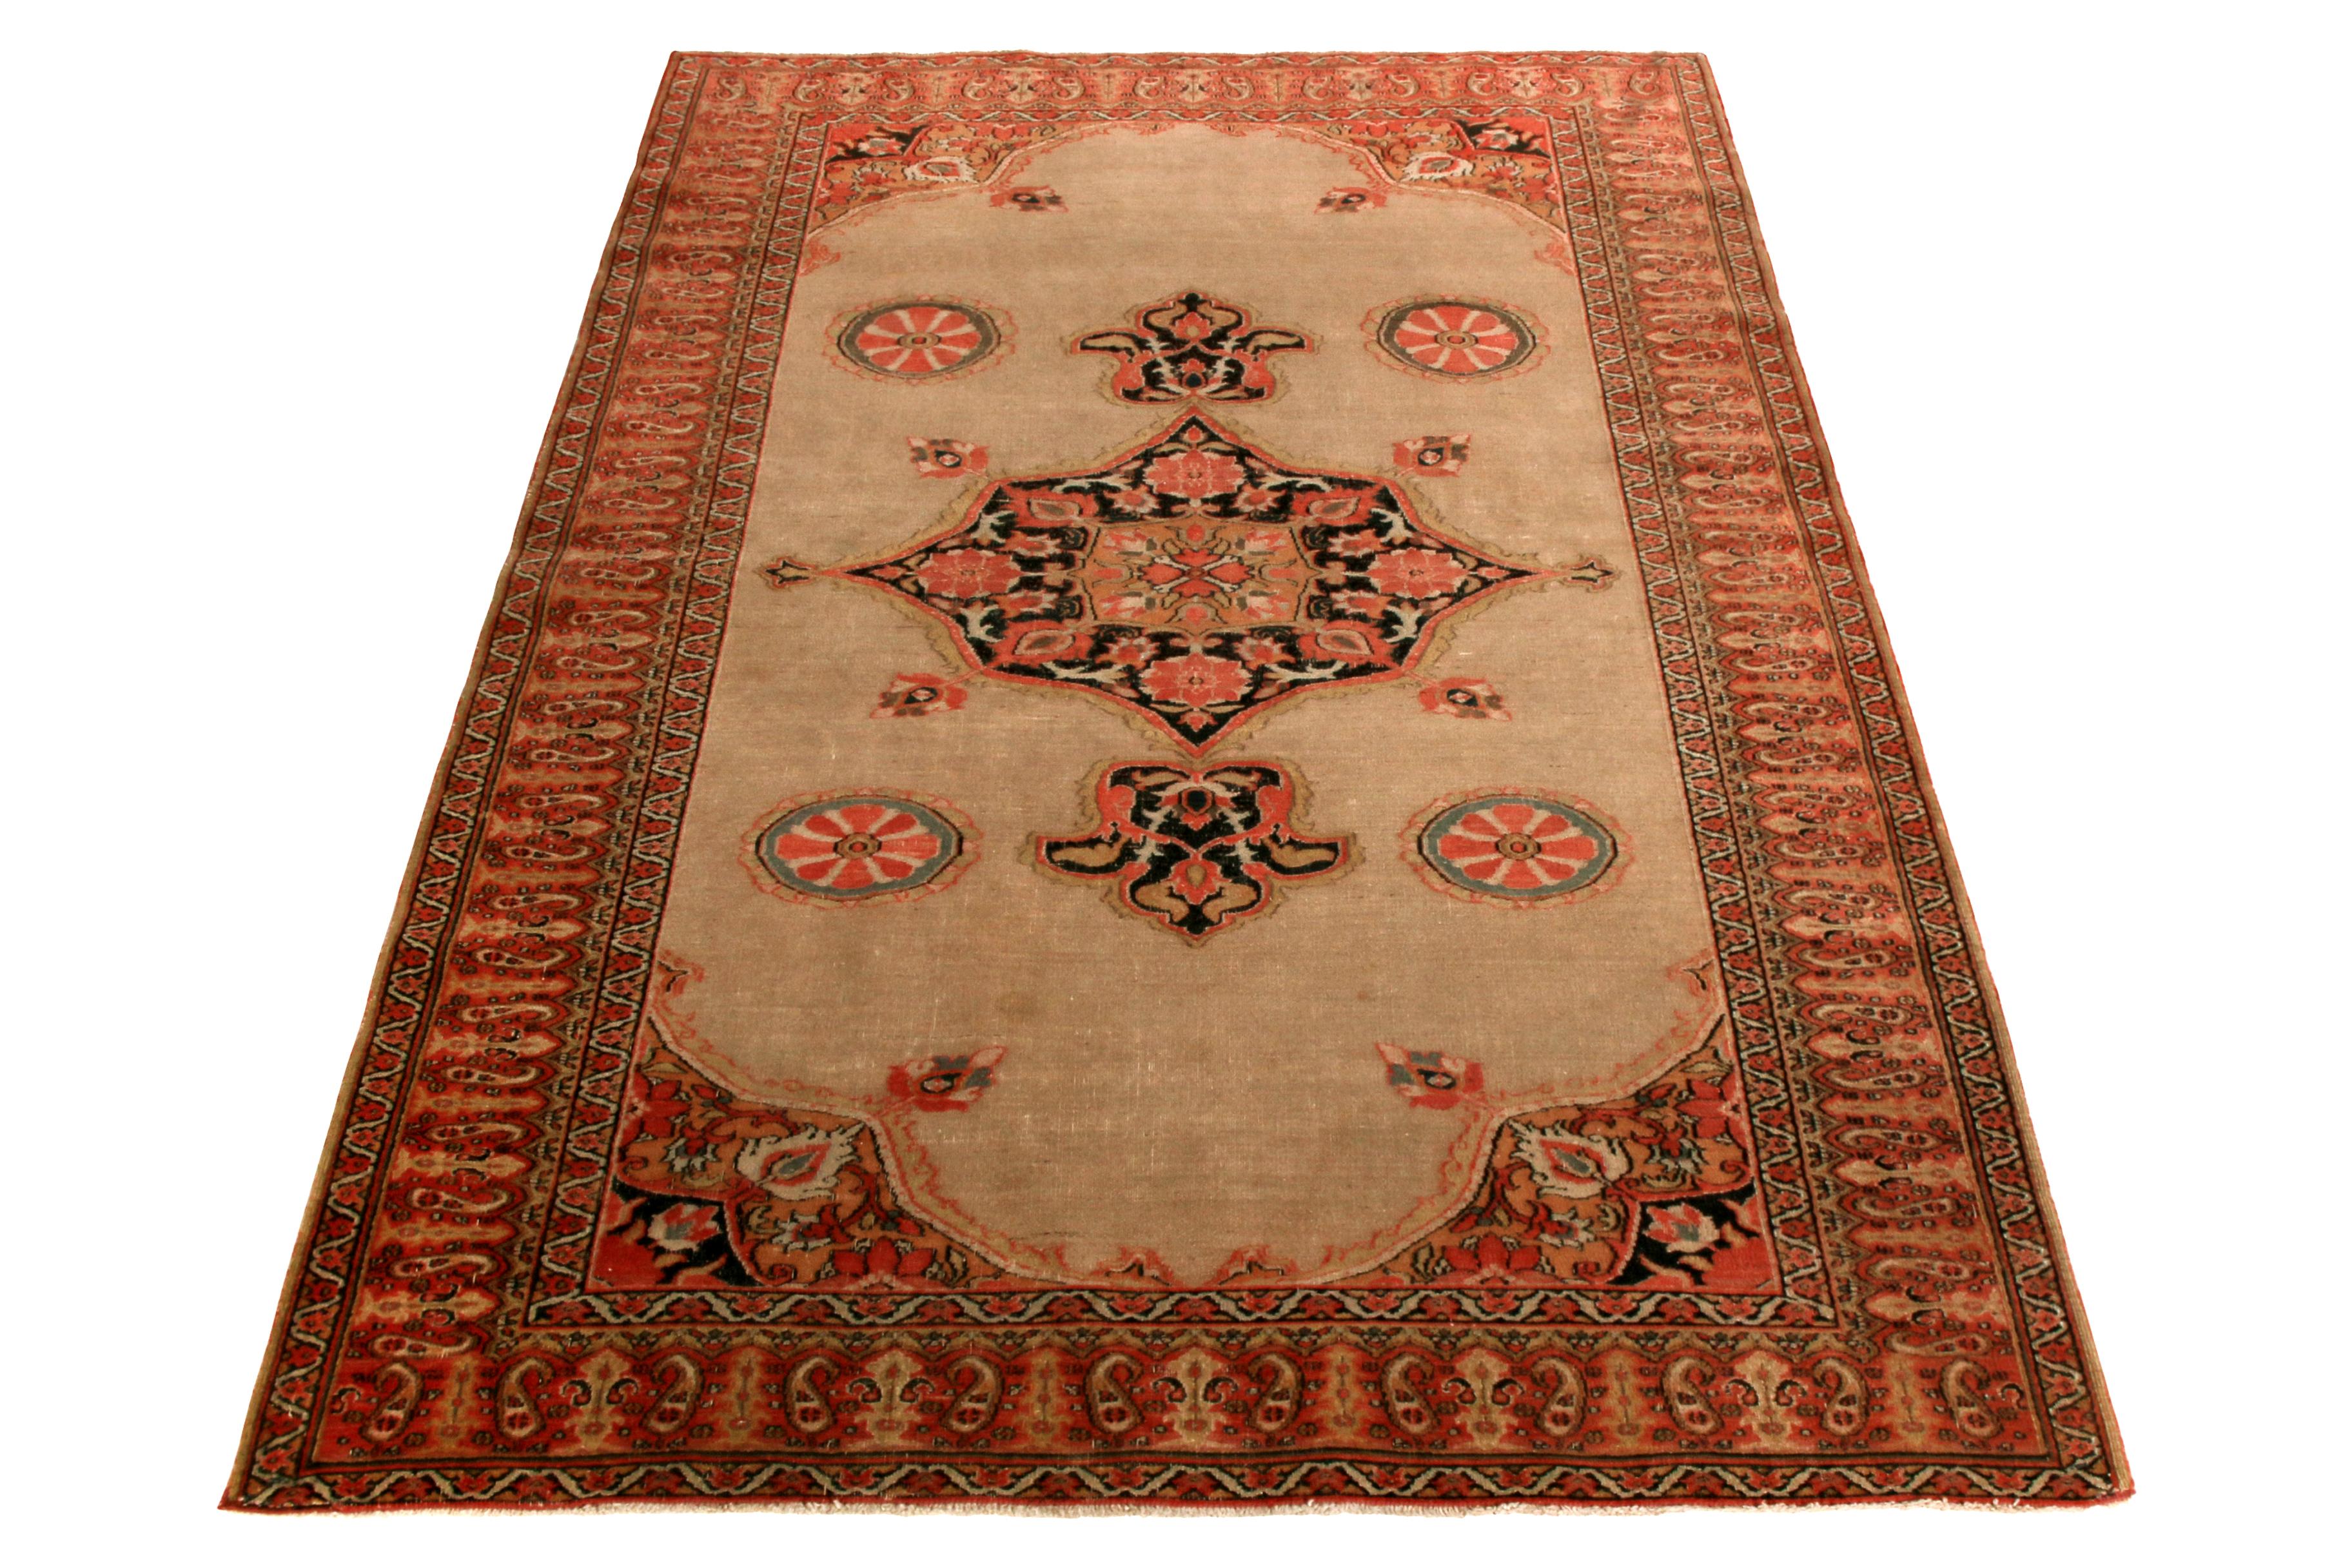 Hand knotted in wool originating between 1890-1900, this antique Doroksh rug hails from the Doroksh province of Persia, acclaimed for the rarity and widely regarded decorative appeal of a Persian rug from this region. Enjoying a distinct black